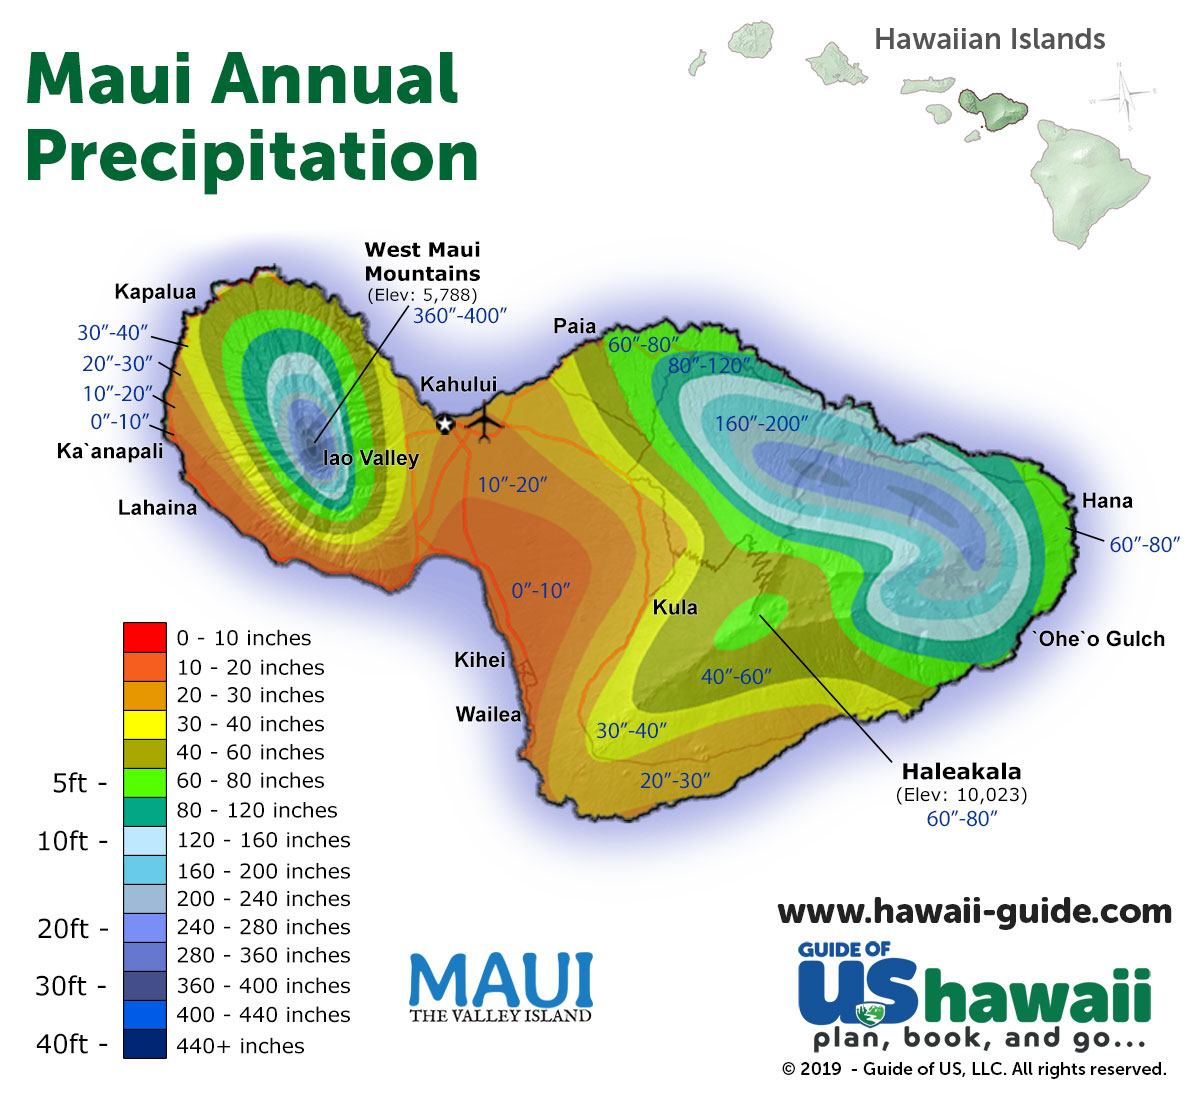 Year Round Weather & Present Day Forecasts for Hawaii